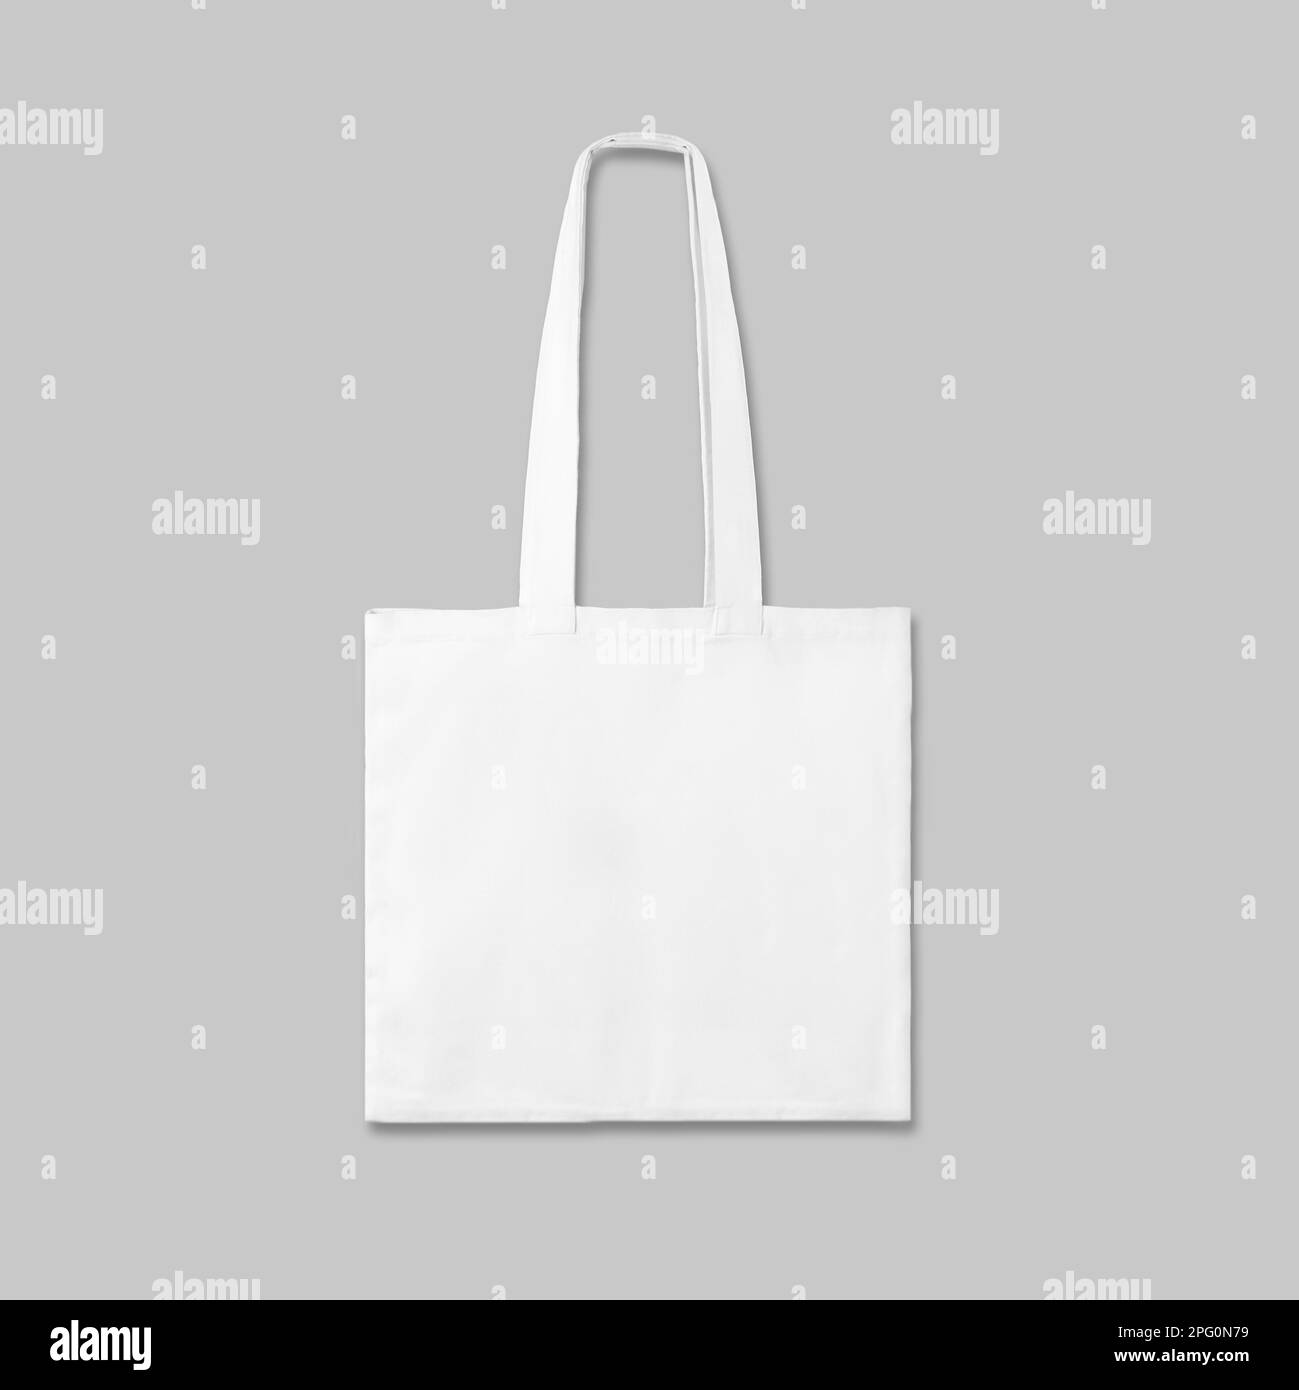 Canvas Tote Bag Eco Recycle Flat Design Isolated On White